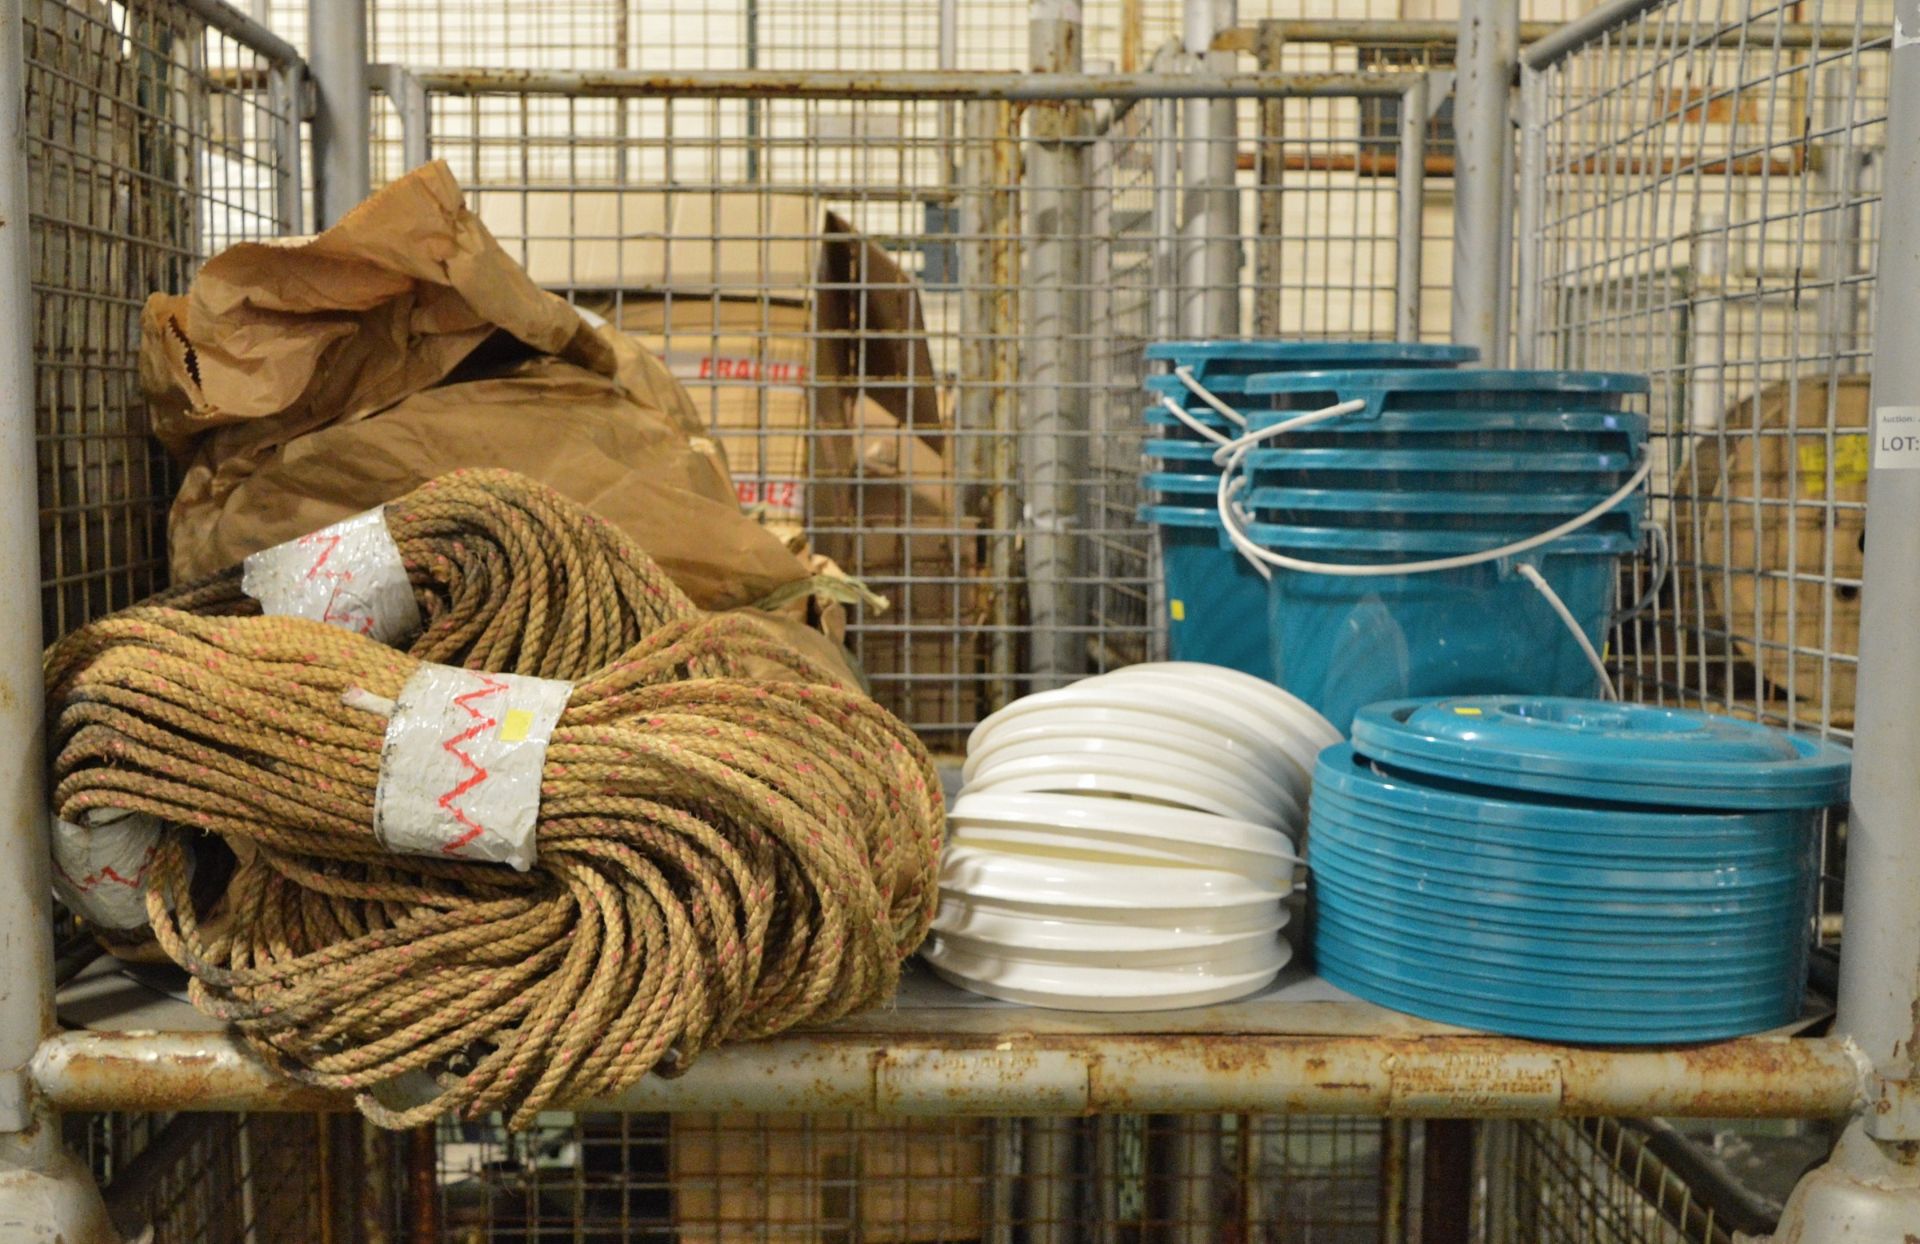 Blue plastic buckets with lids, hessian rope lengths